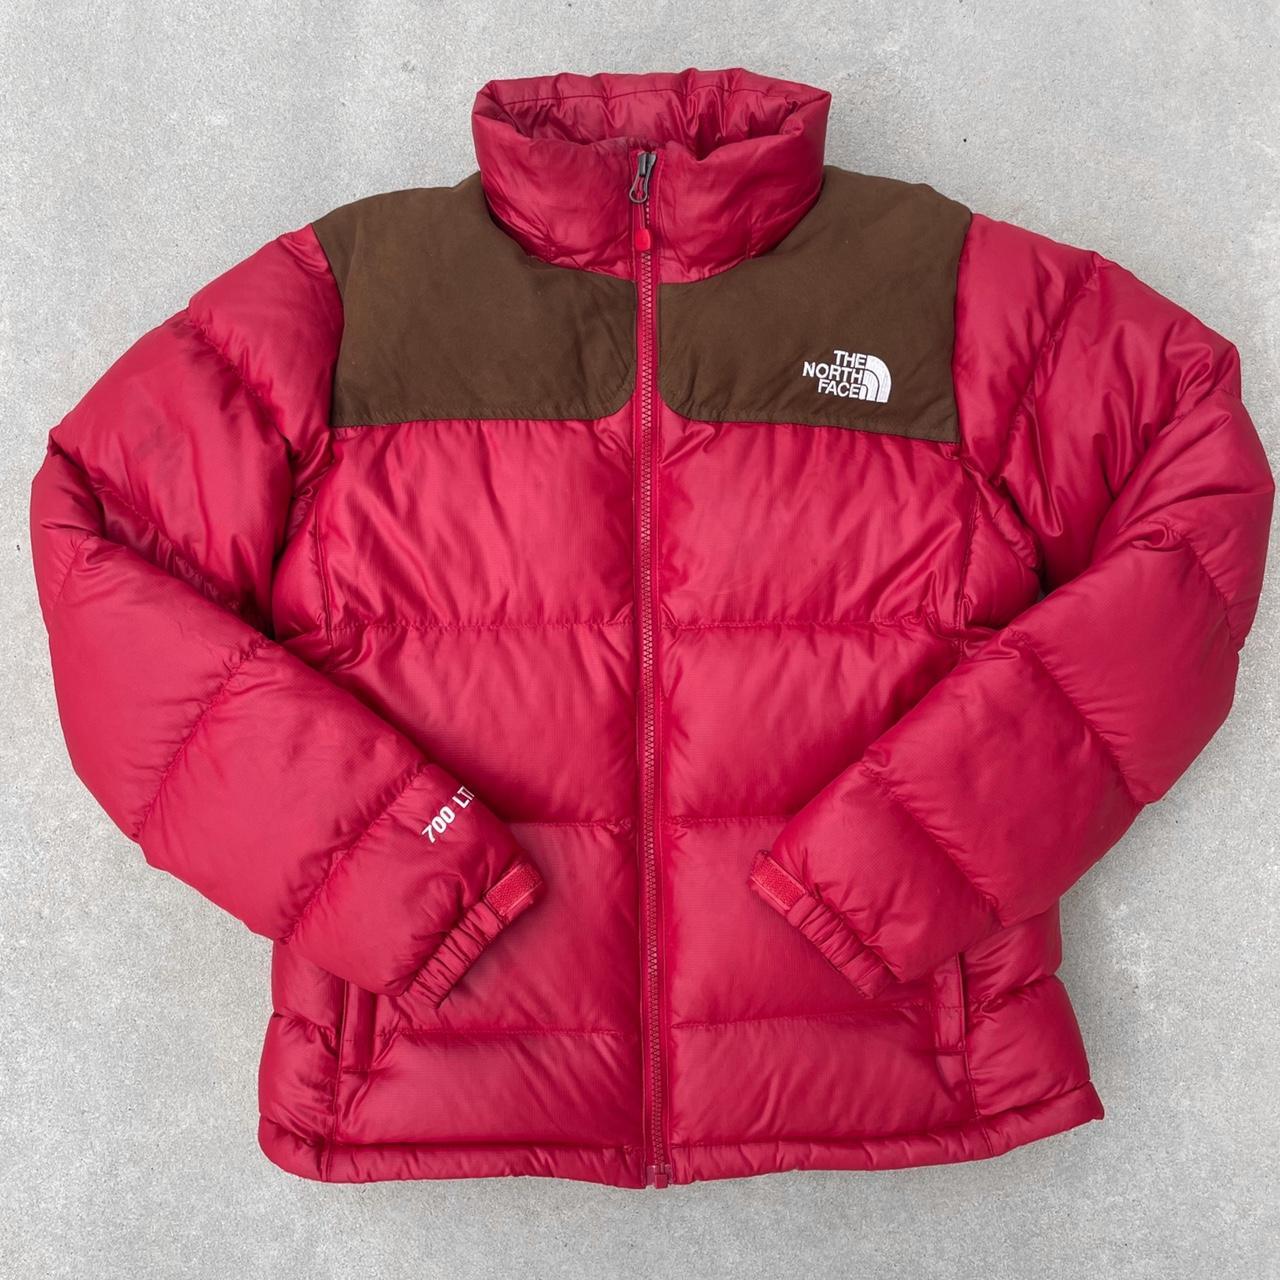 Vintage The North Face Puffer Jacket 700 in Red with... - Depop